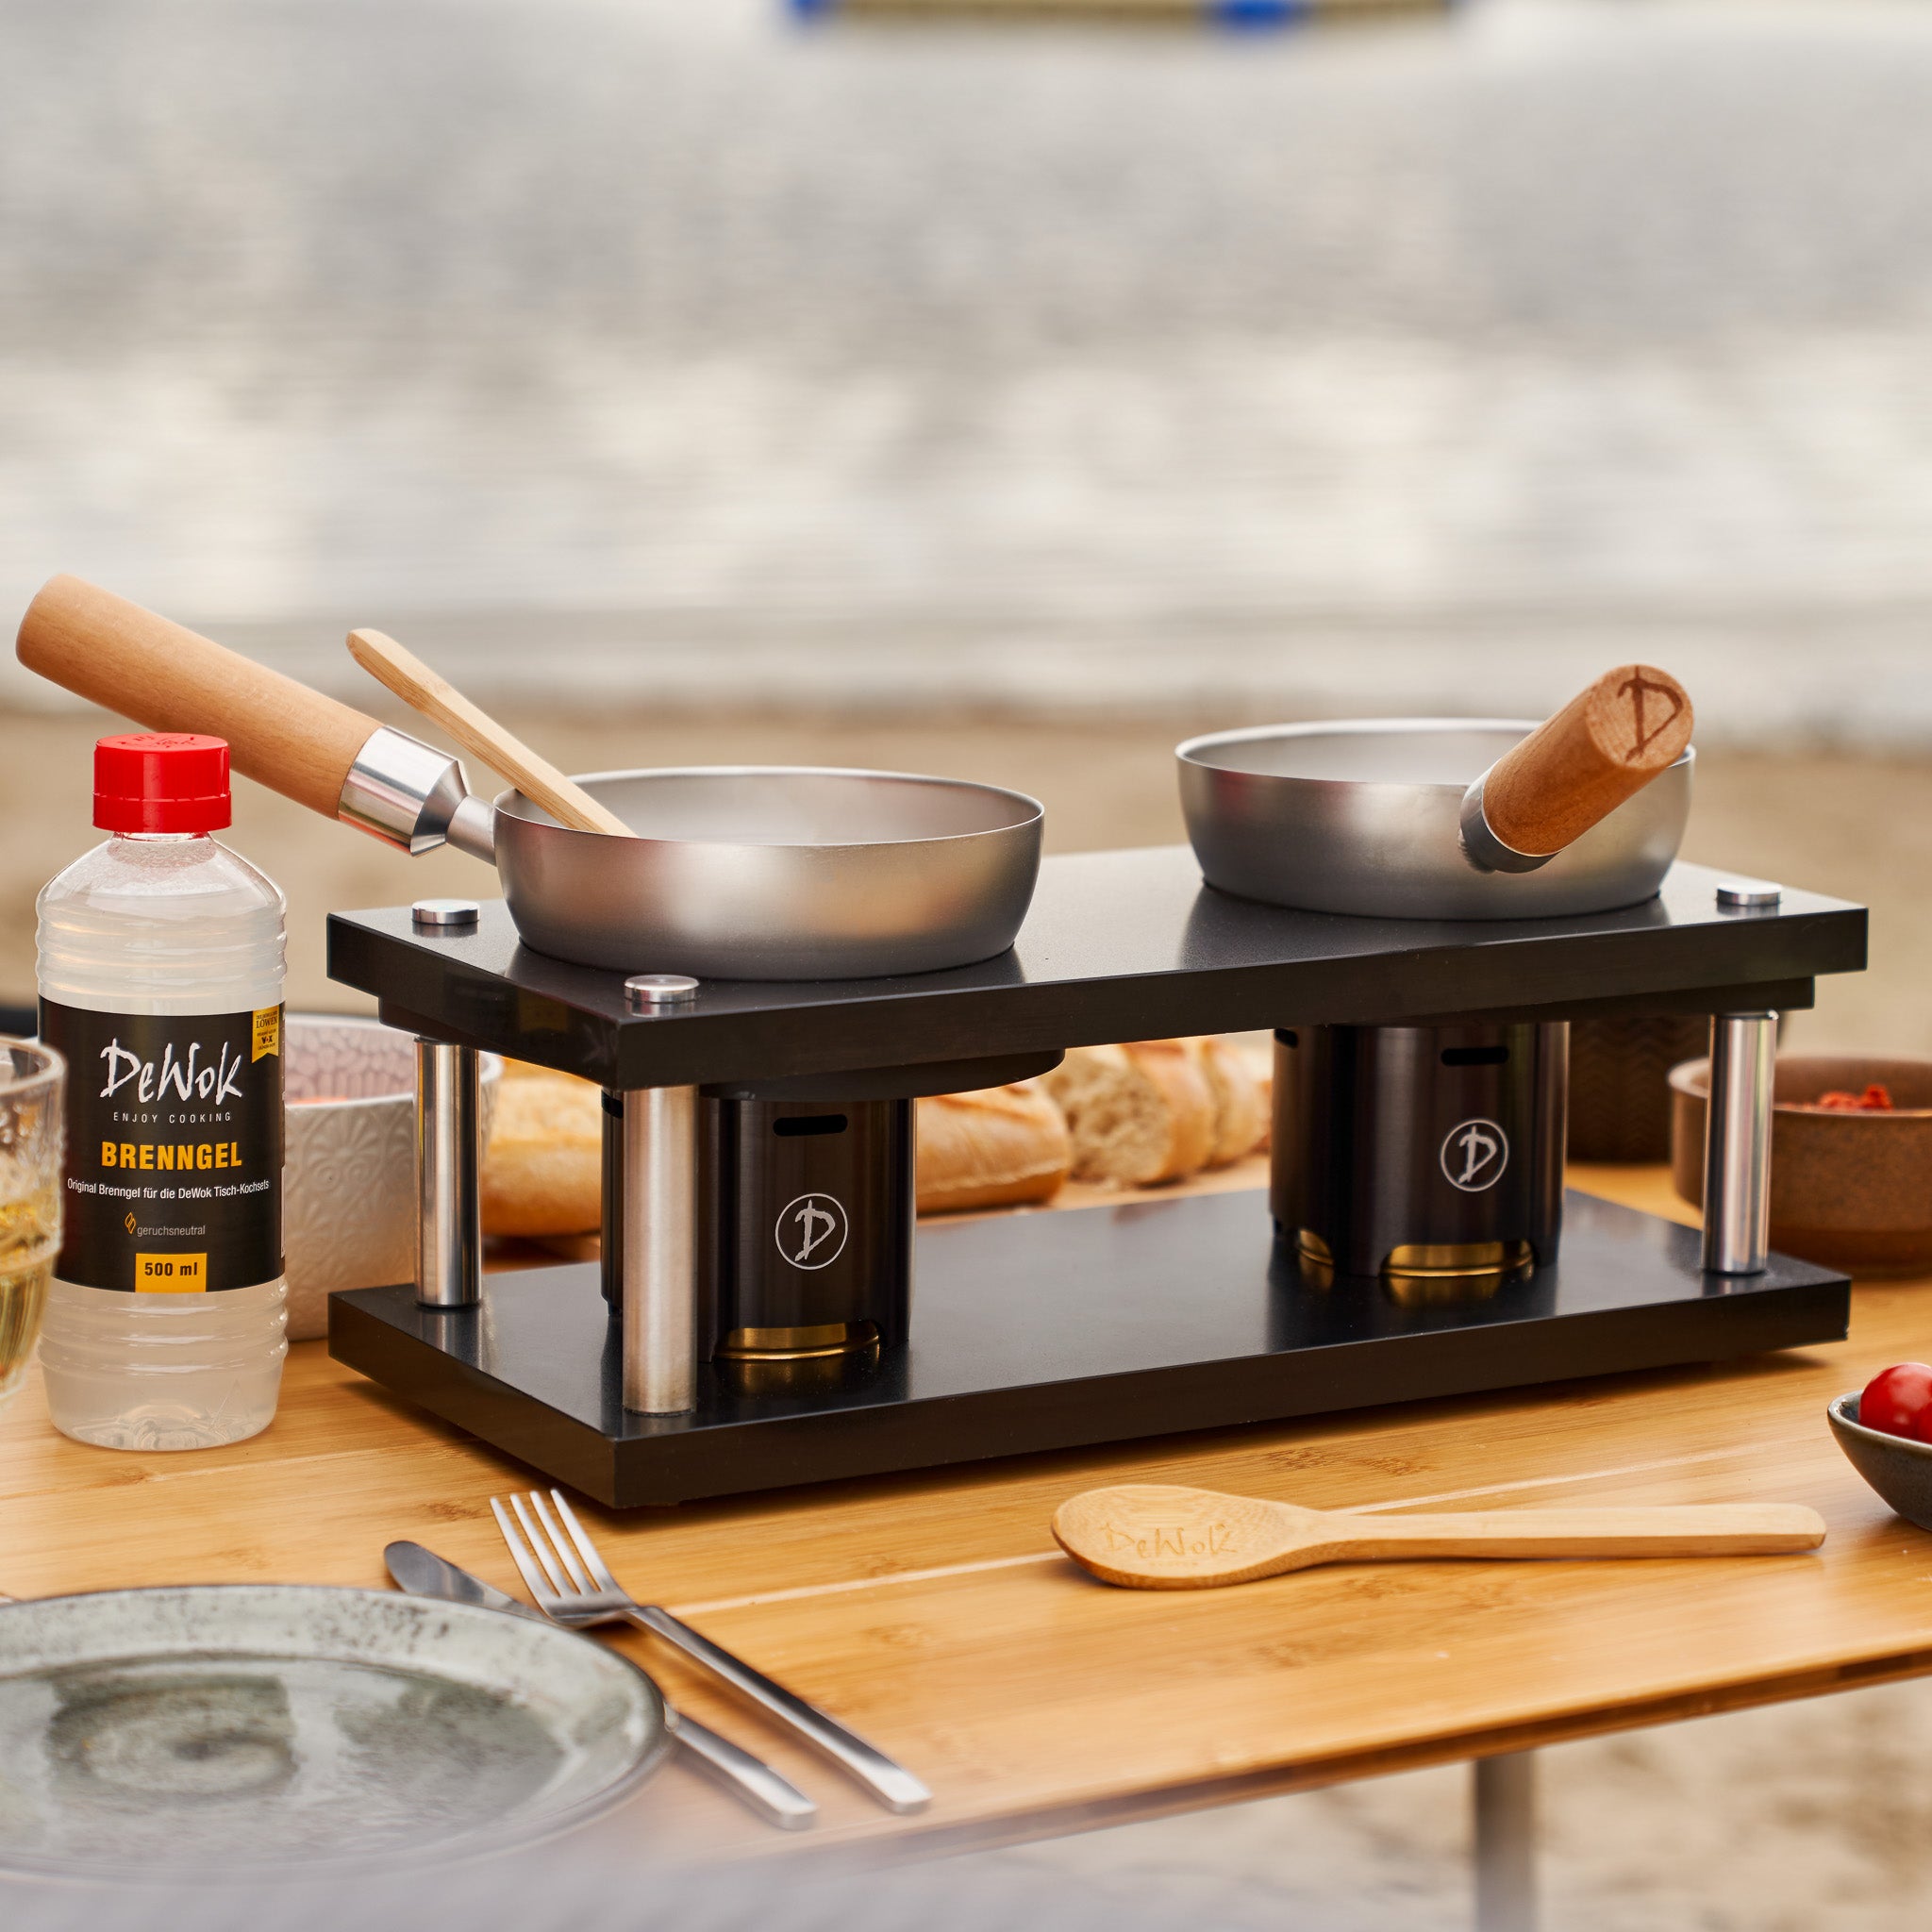 DeWok Camping & OUTDOOR package, cooking set for up to 4 people + 1L burning gel free.